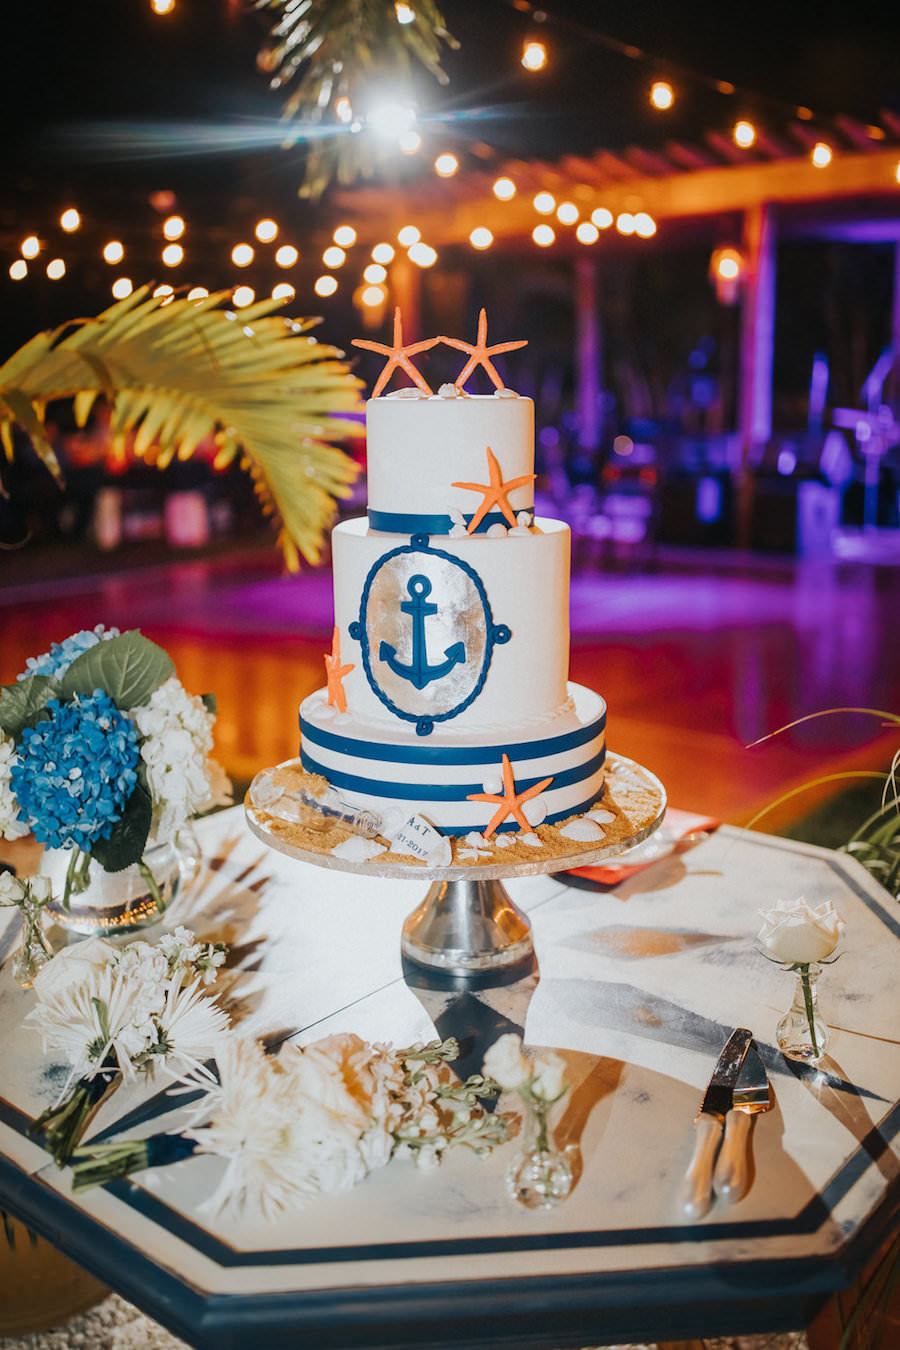 Three Tiered Round Hand Painted Nautical Wedding Cake with Anchor and Starfish Accents